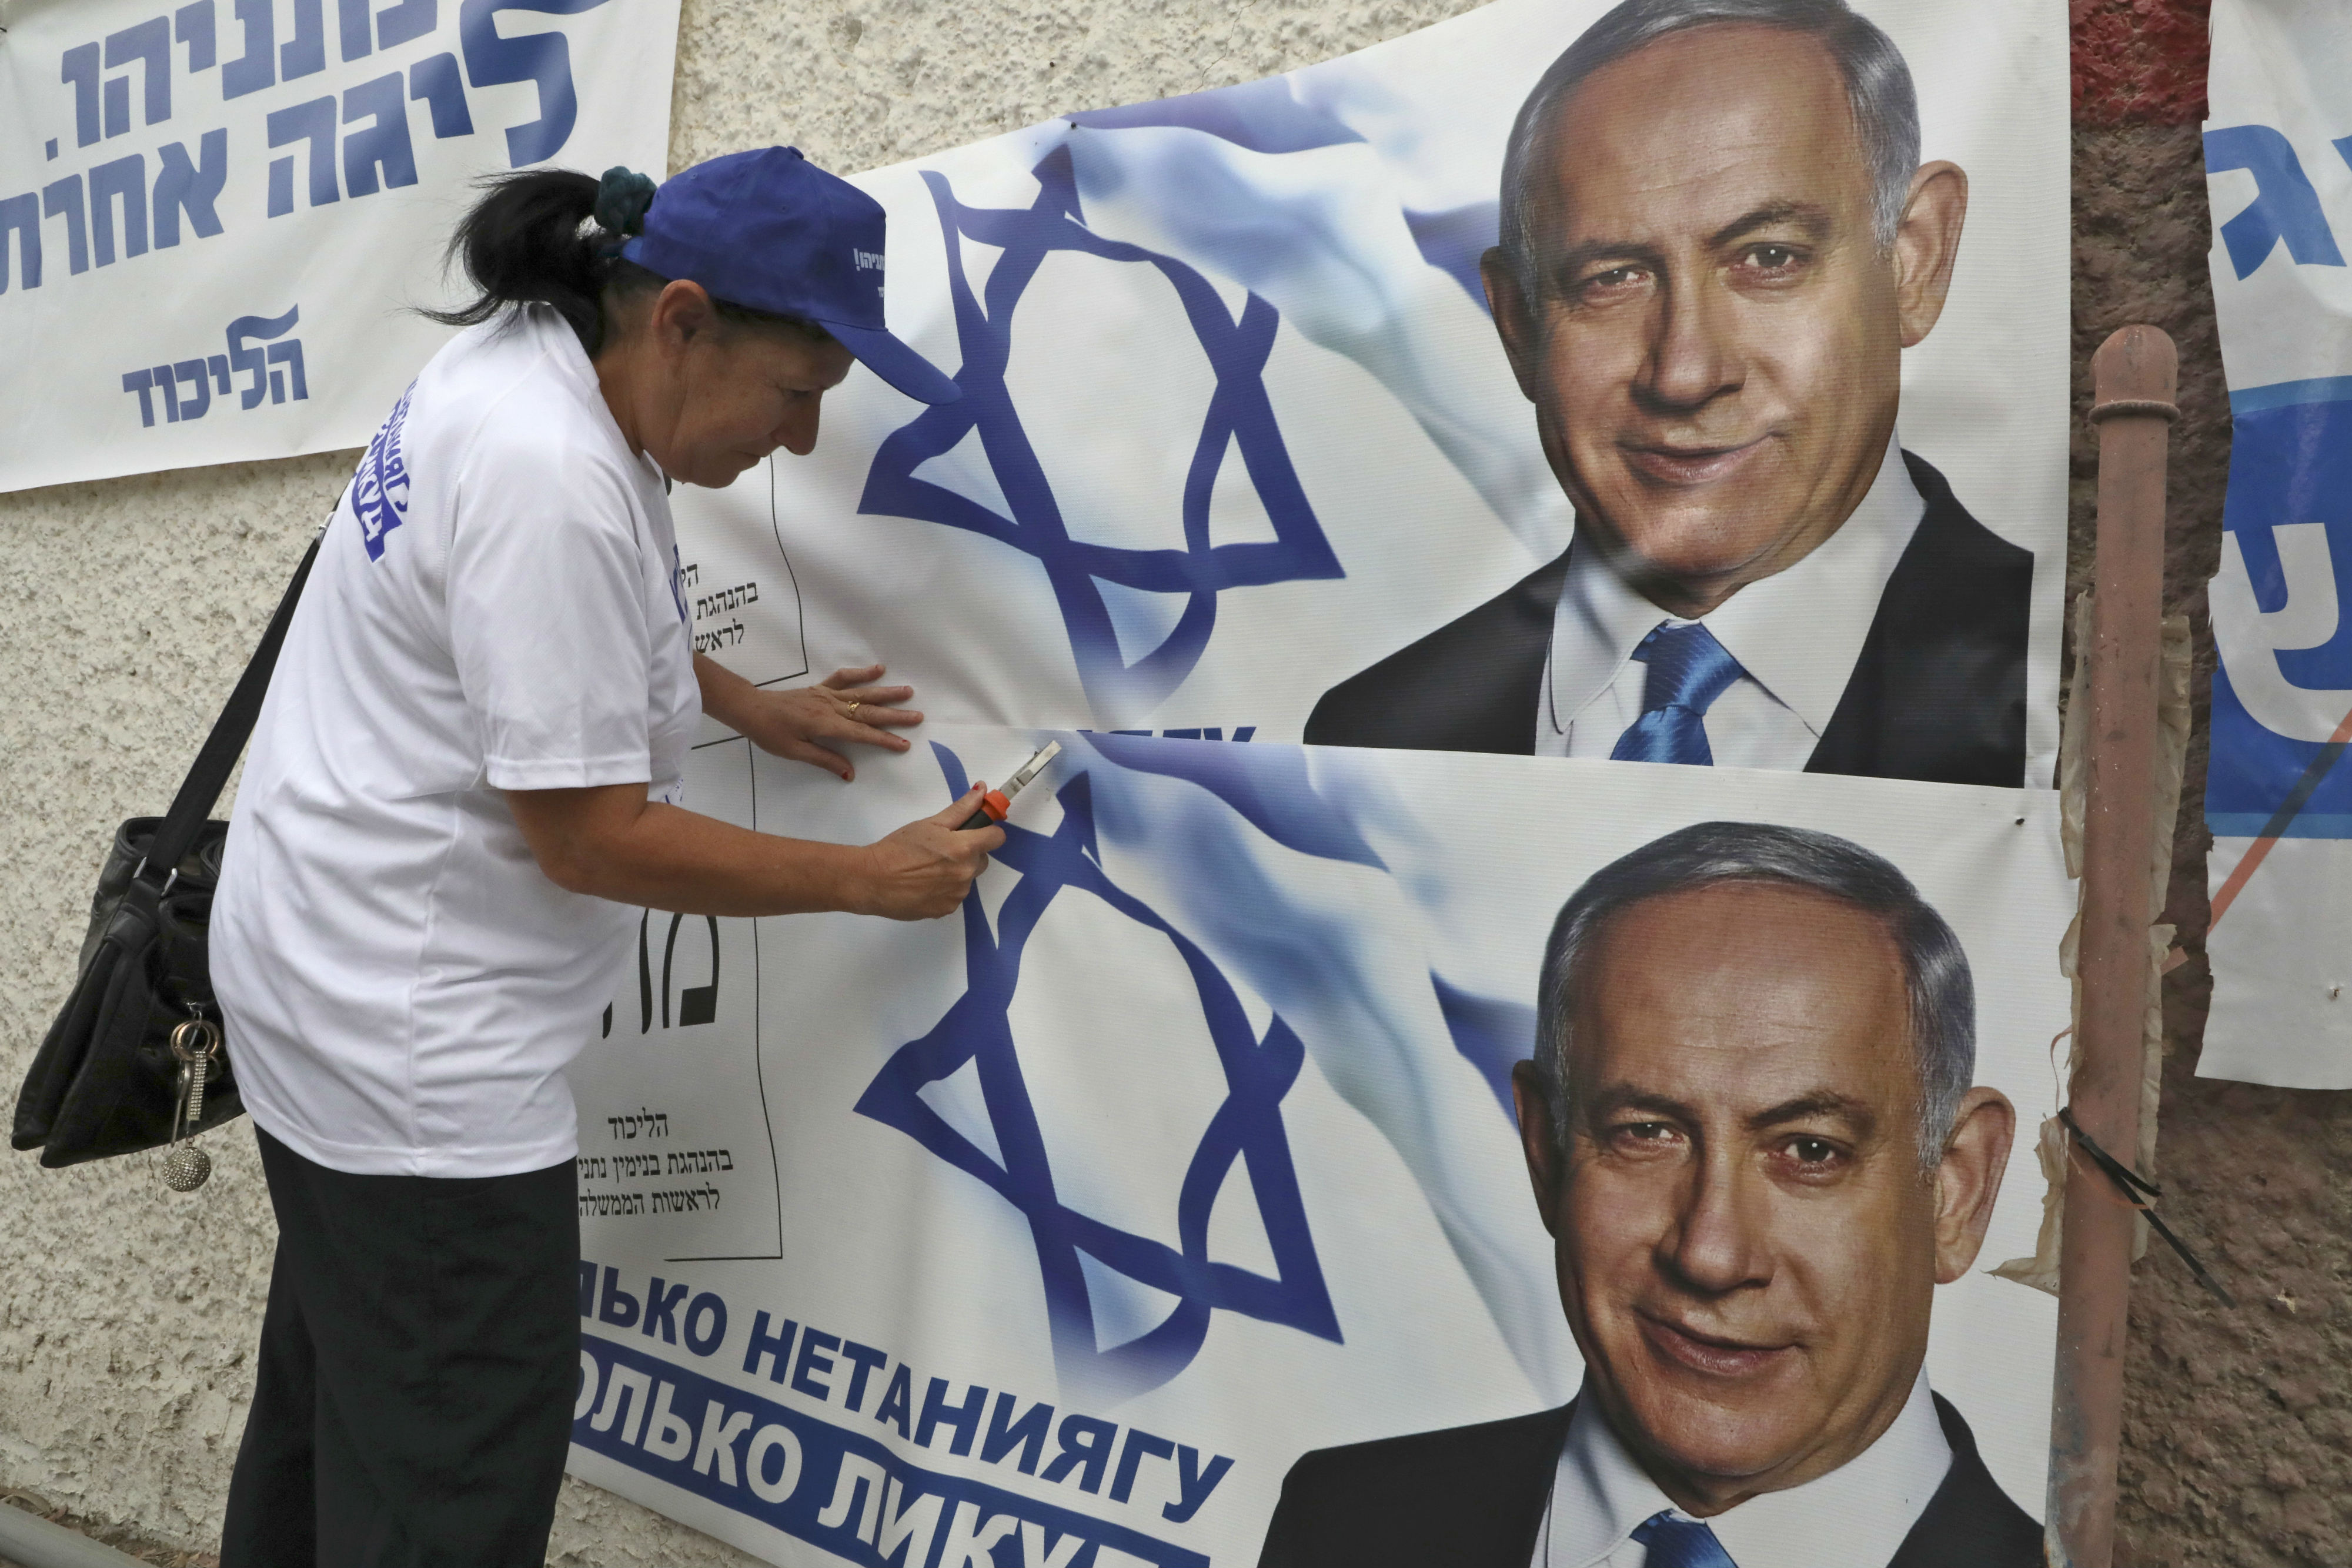 A woman places electoral banners for the Likud party showing chairman and Israeli Prime Minister Benjamin Netanyahu in the southern Israeli city of Beersheva (AFP)